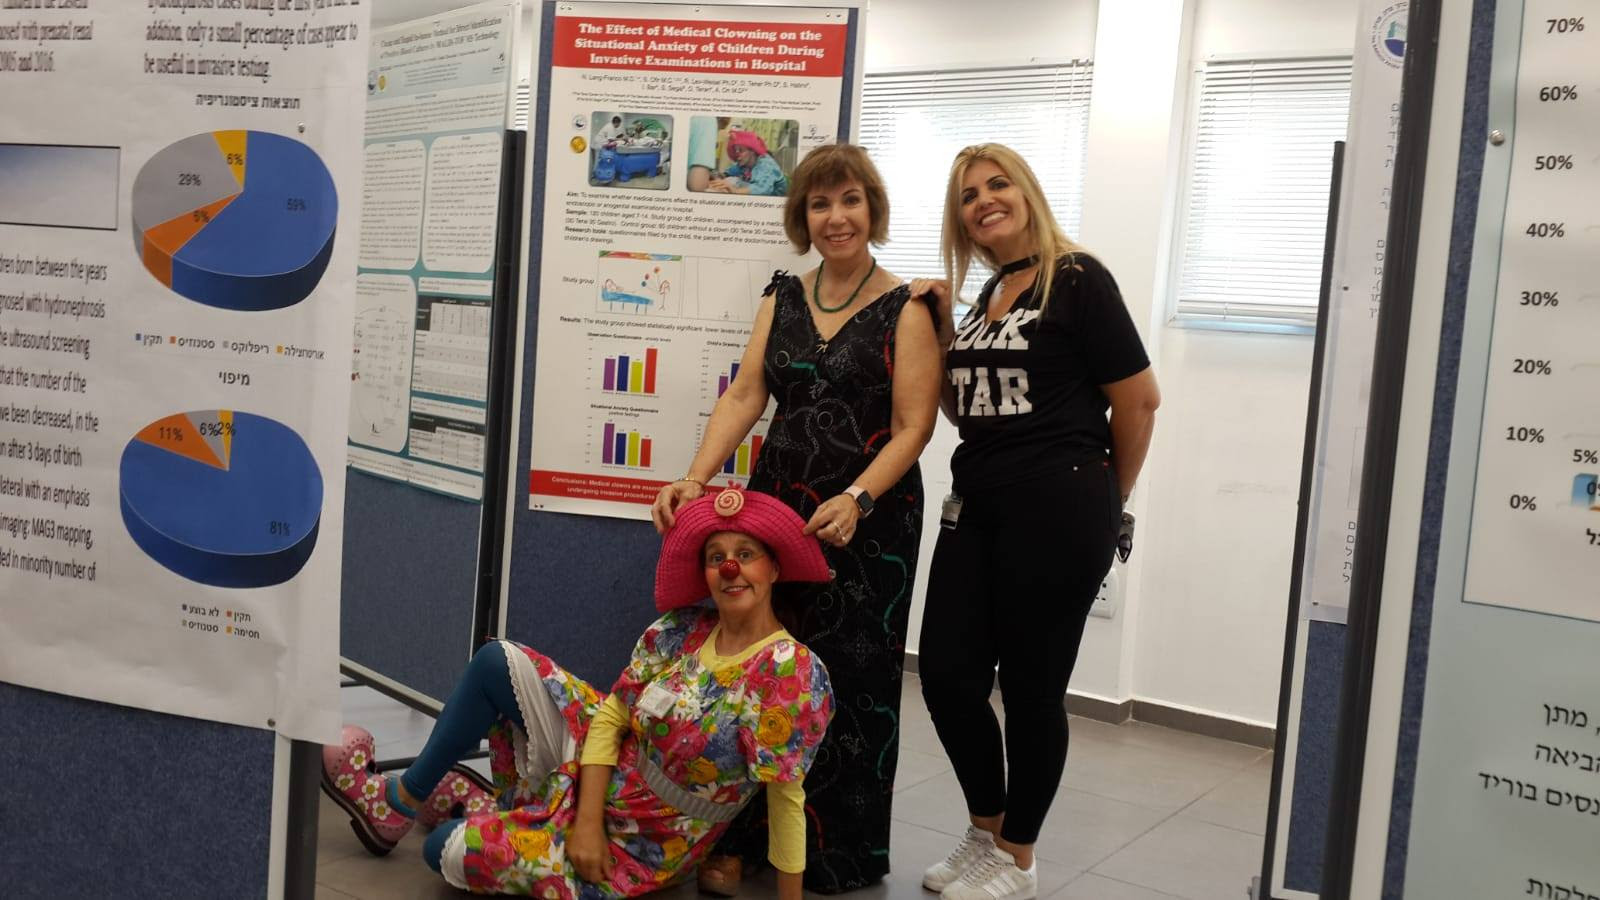 Medical clown Shoshi Ofir, on floor, at presentation of the study "The Effect of Medical Clowning on the Situational Anxiety of Children During Invasive Examinations in Hospital" at Baruch Padeh Medical Center, Tiberias. With her are Dr. Nessia Lang, left, and Orly Cohen of the Tene Center. Photo courtesy of Dream Doctors